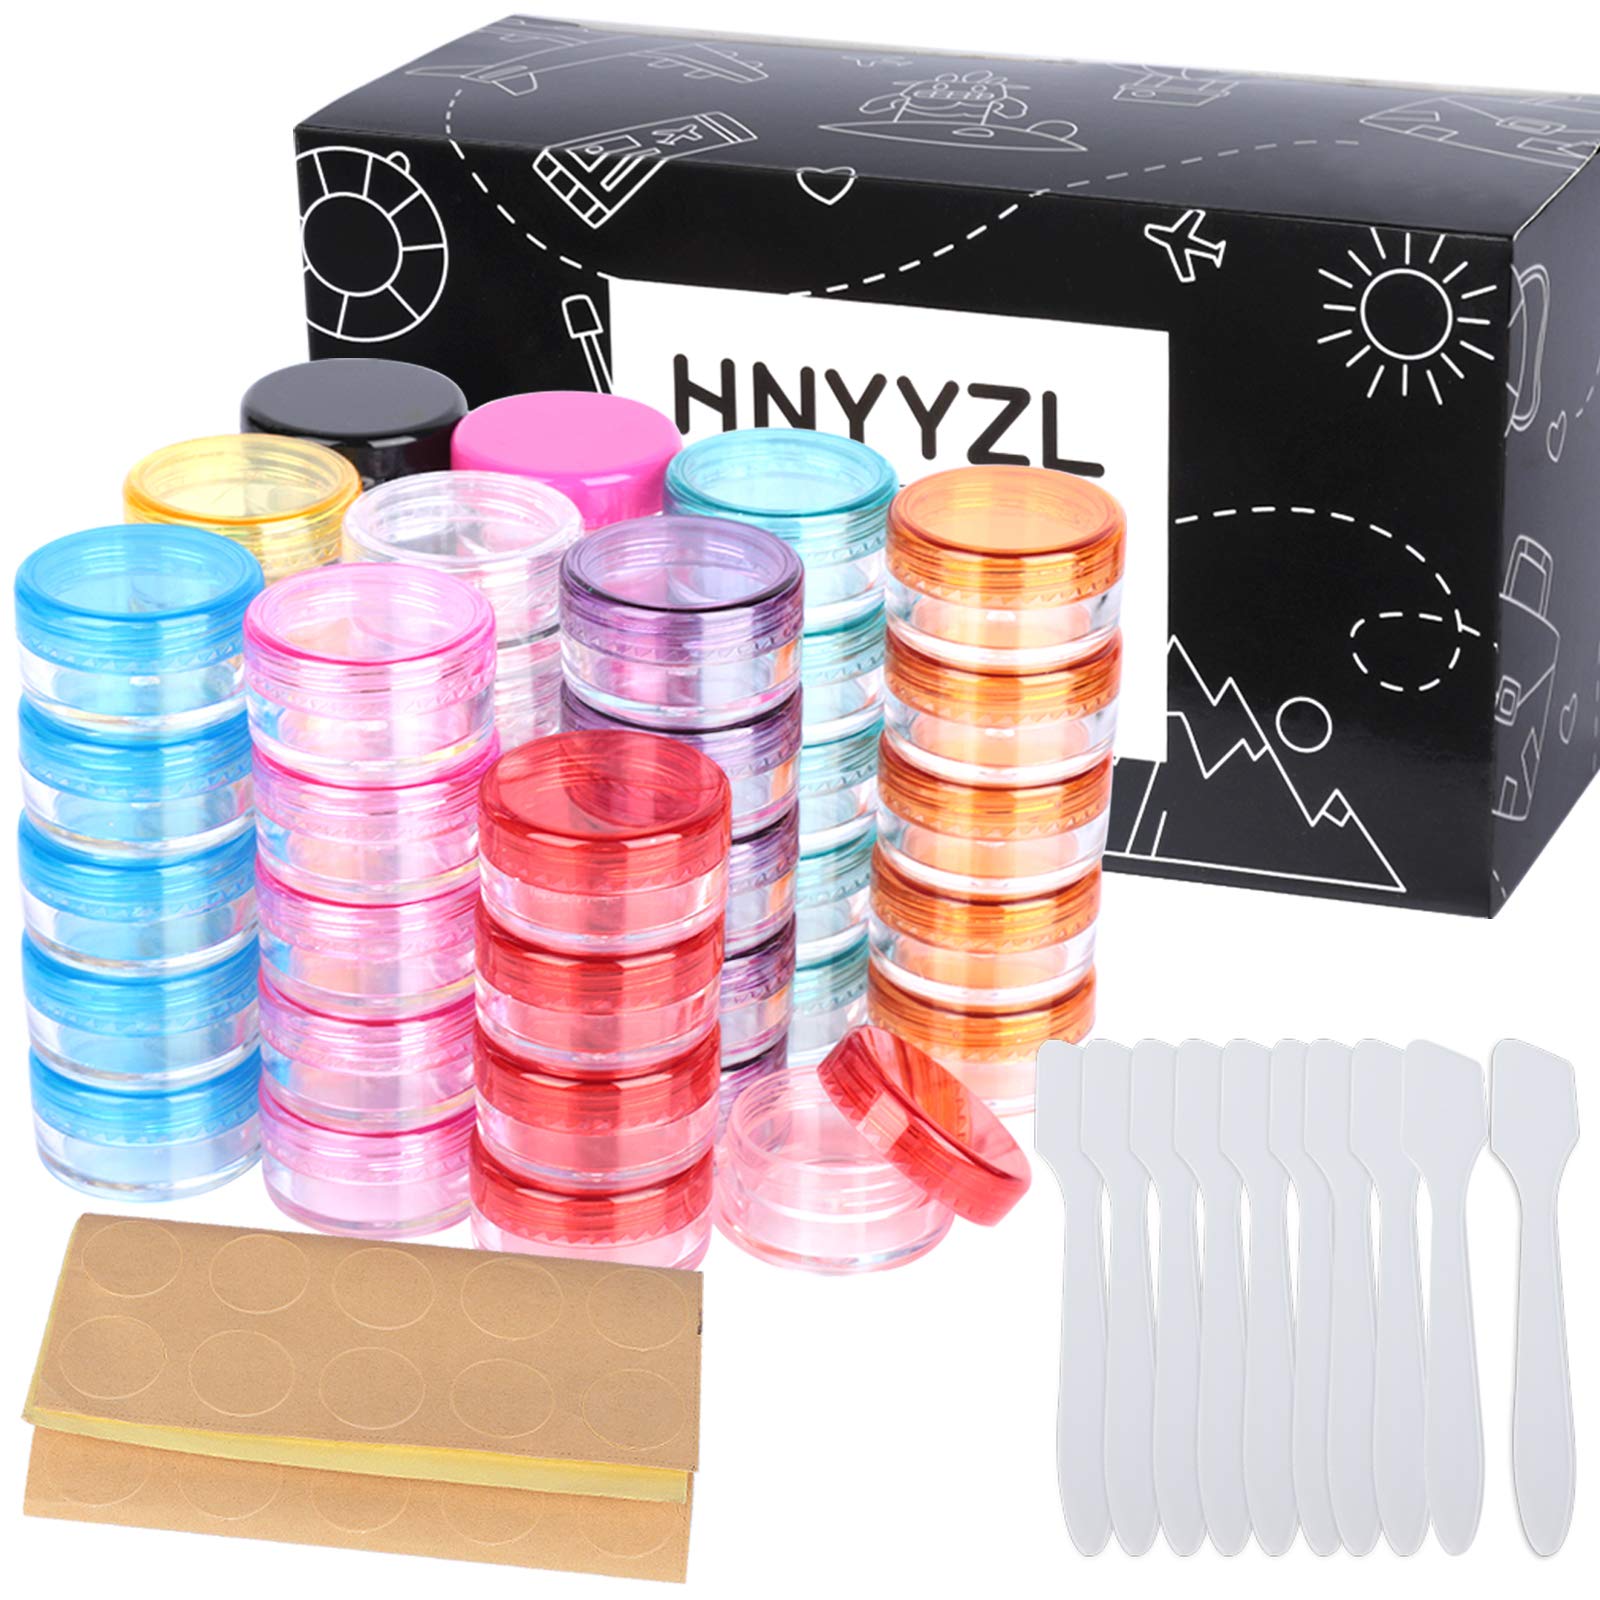 10pcs Nail Art Storage Jars Plastic Cosmetic Sample Containers for Beads  Jewelry